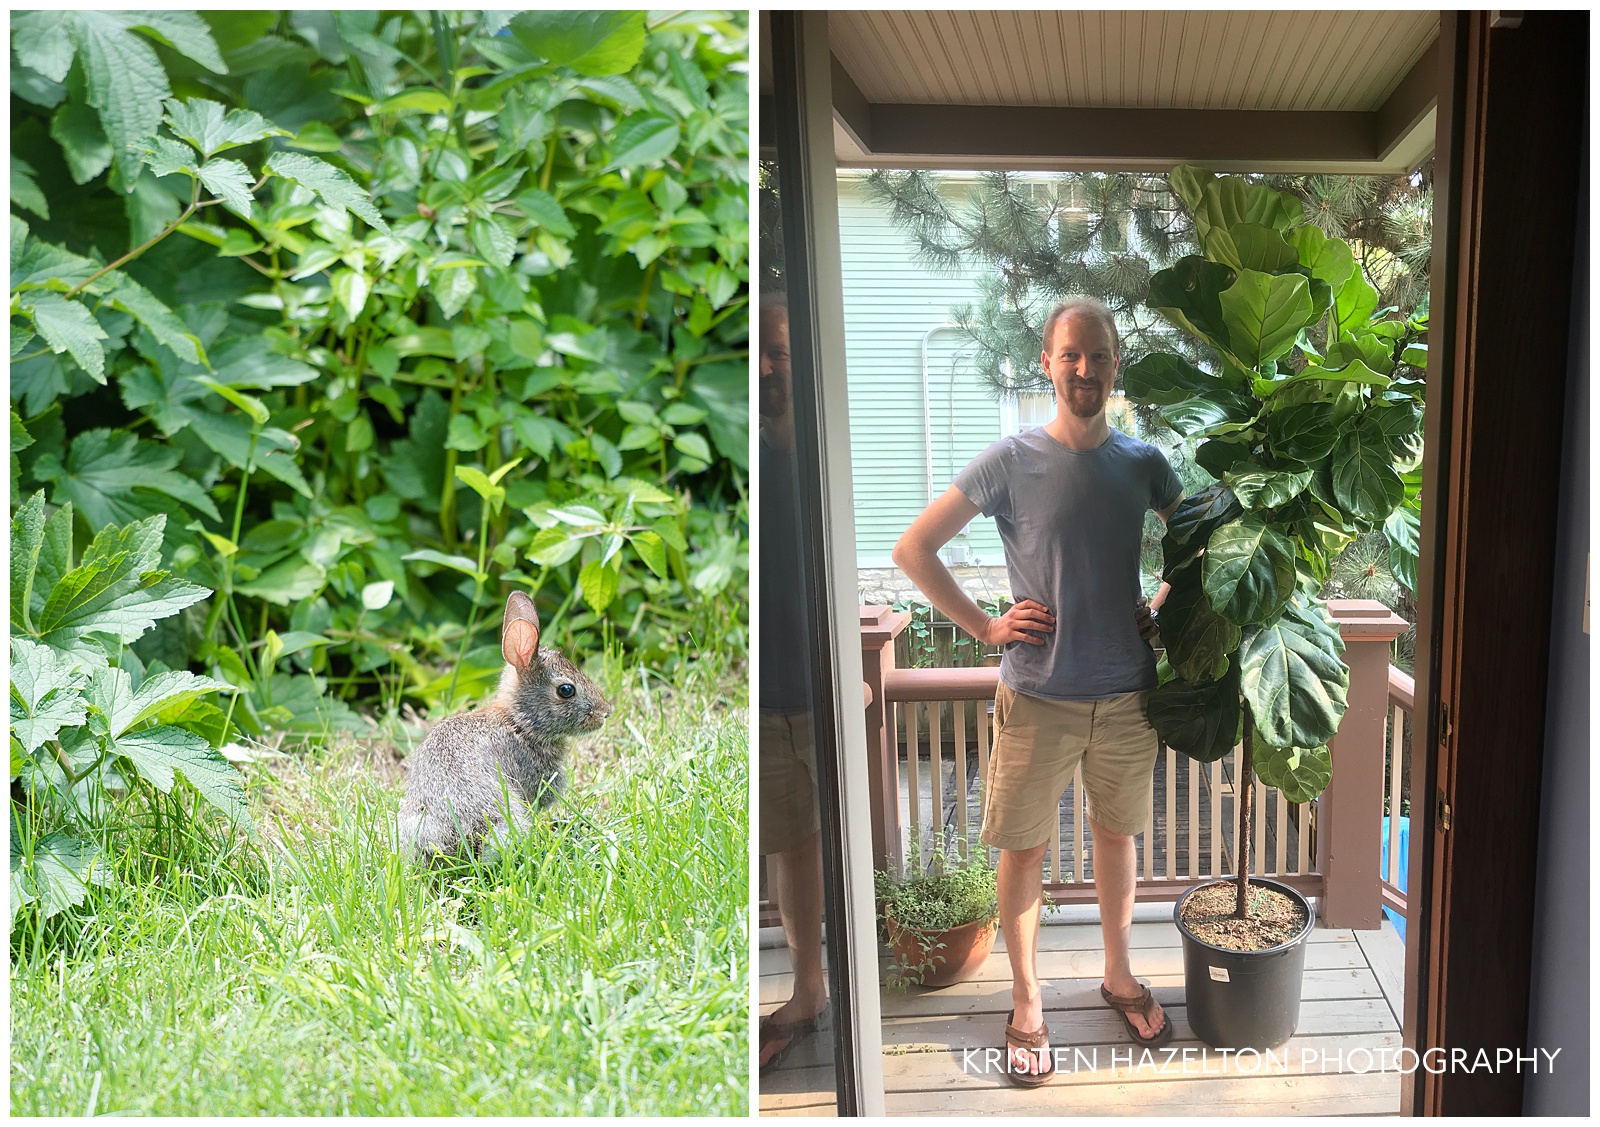 Baby bunny in the backyard and man standing next to a 7 foot tall fiddle leaf fig